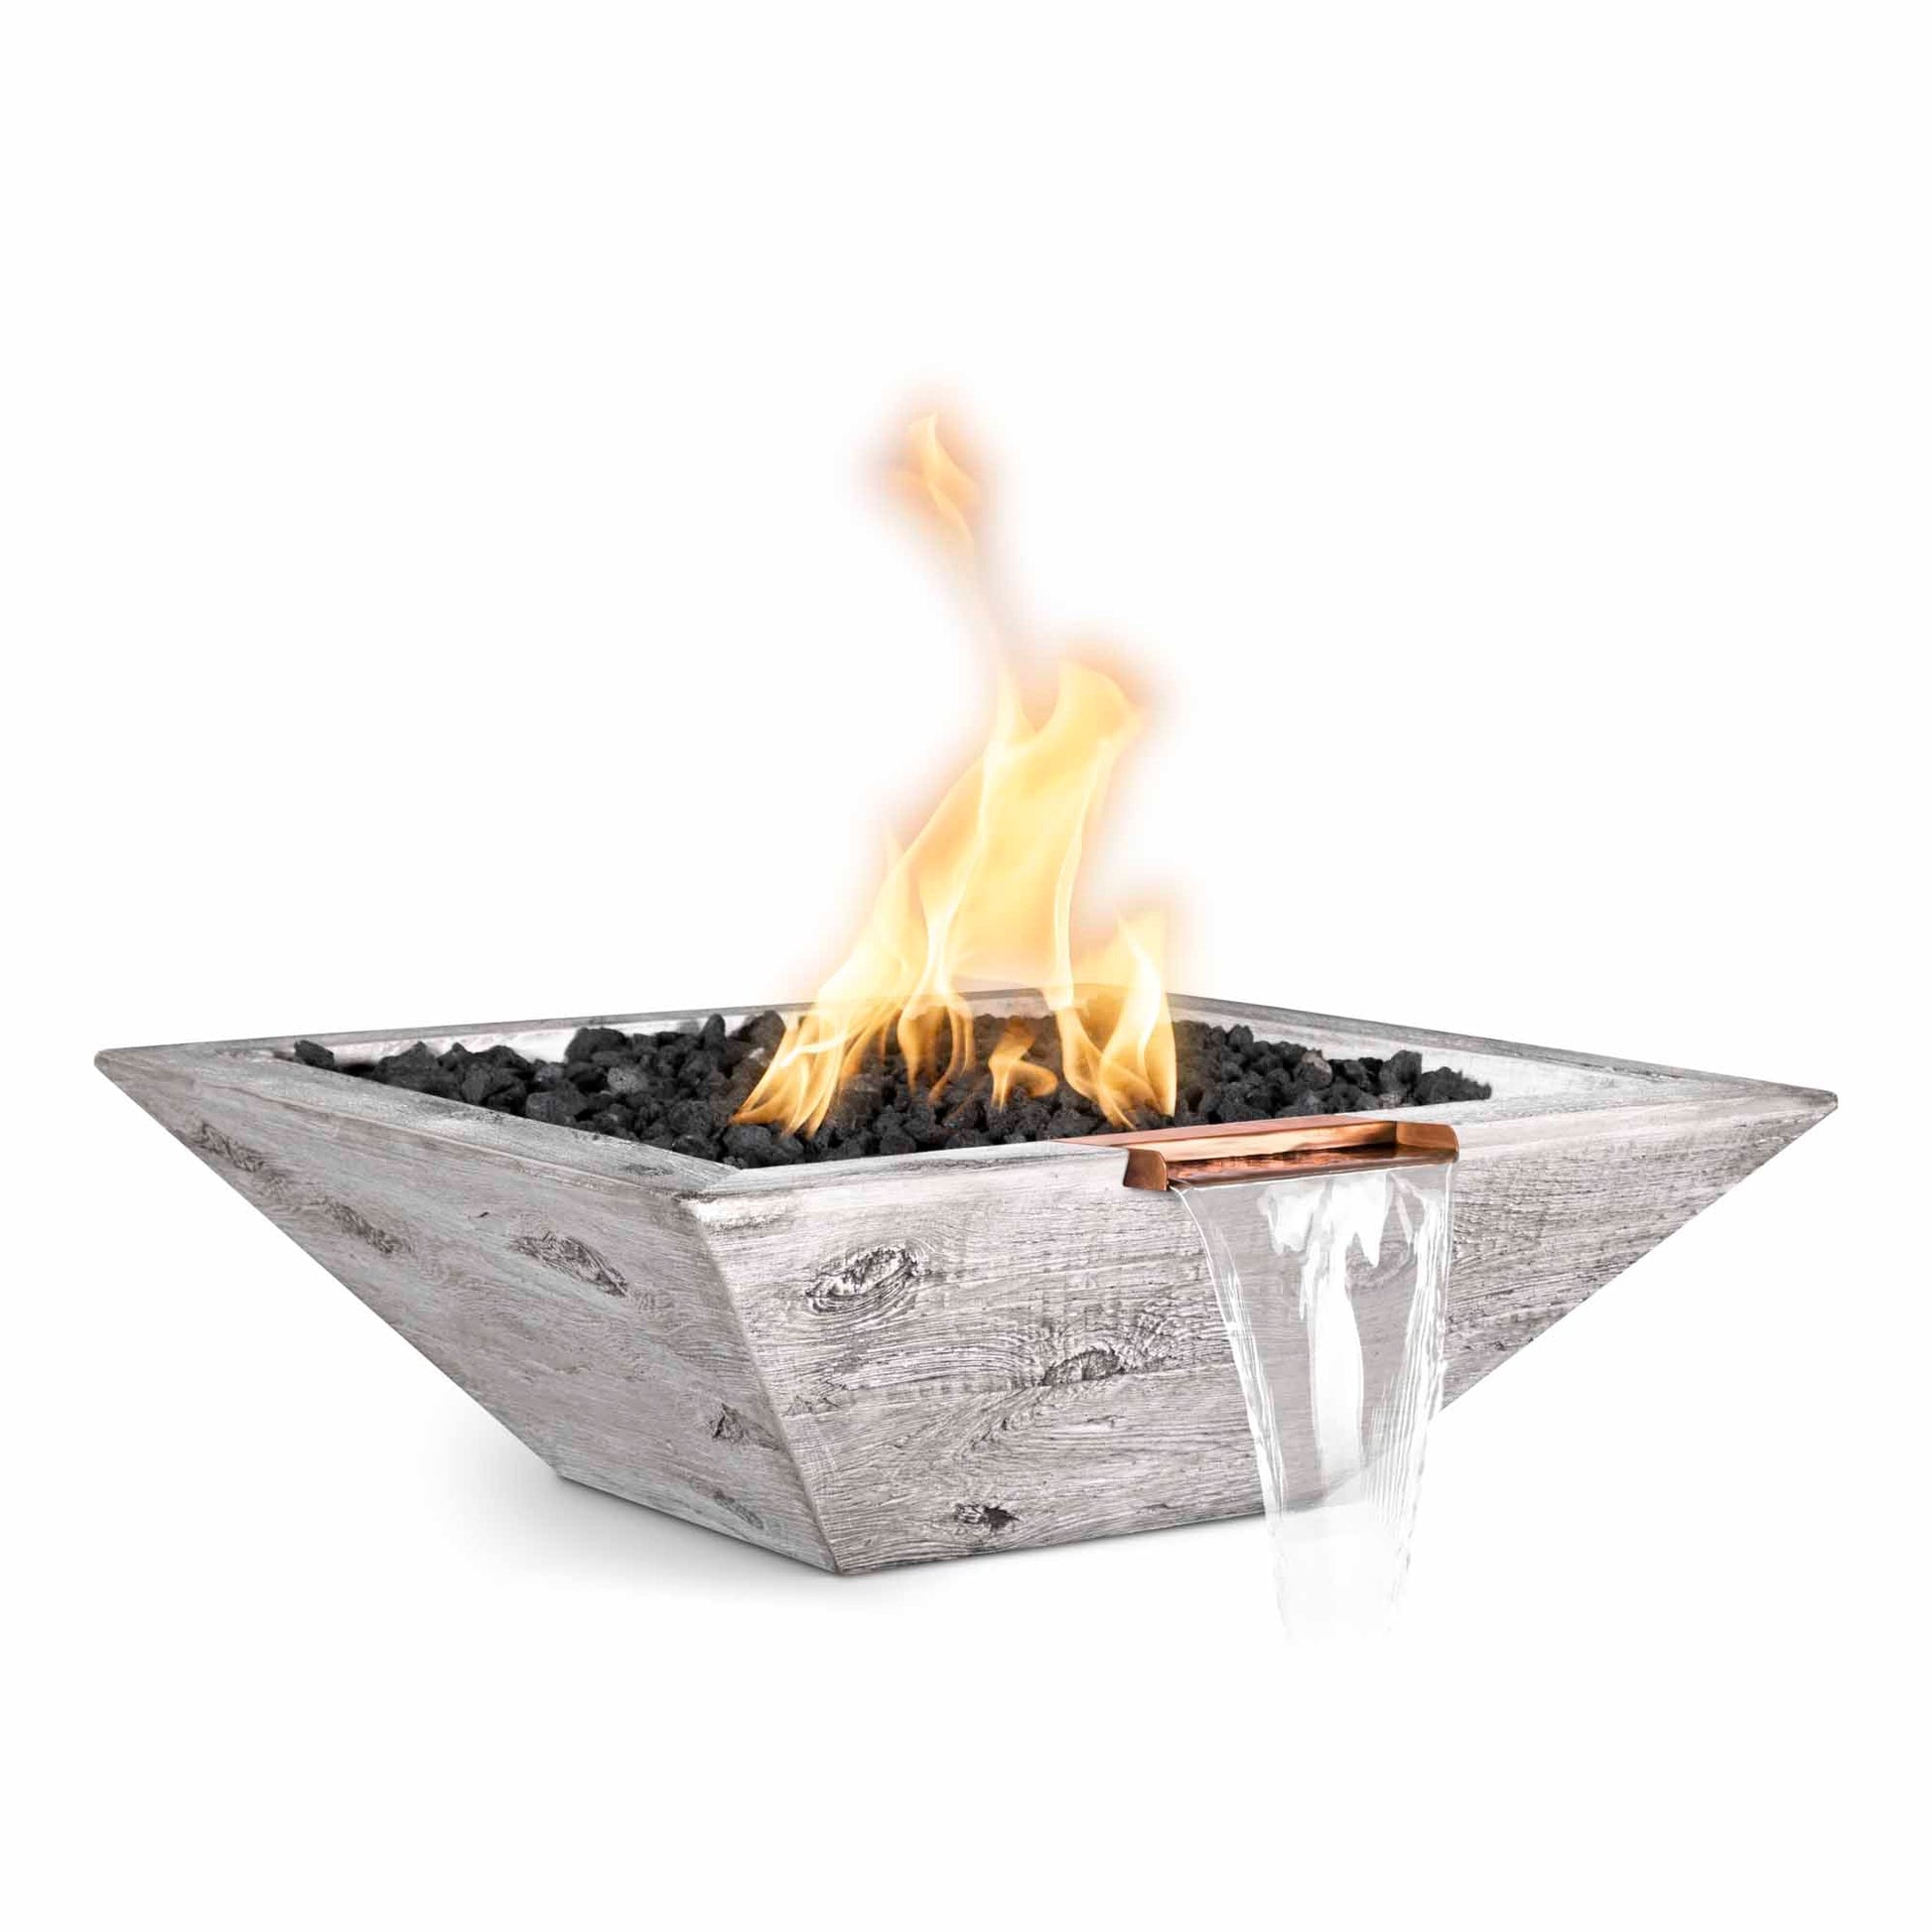 The Outdoor Plus Square Maya 30" Ebony Wood Grain Liquid Propane Fire & Water Bowl with Match Lit with Flame Sense Ignition